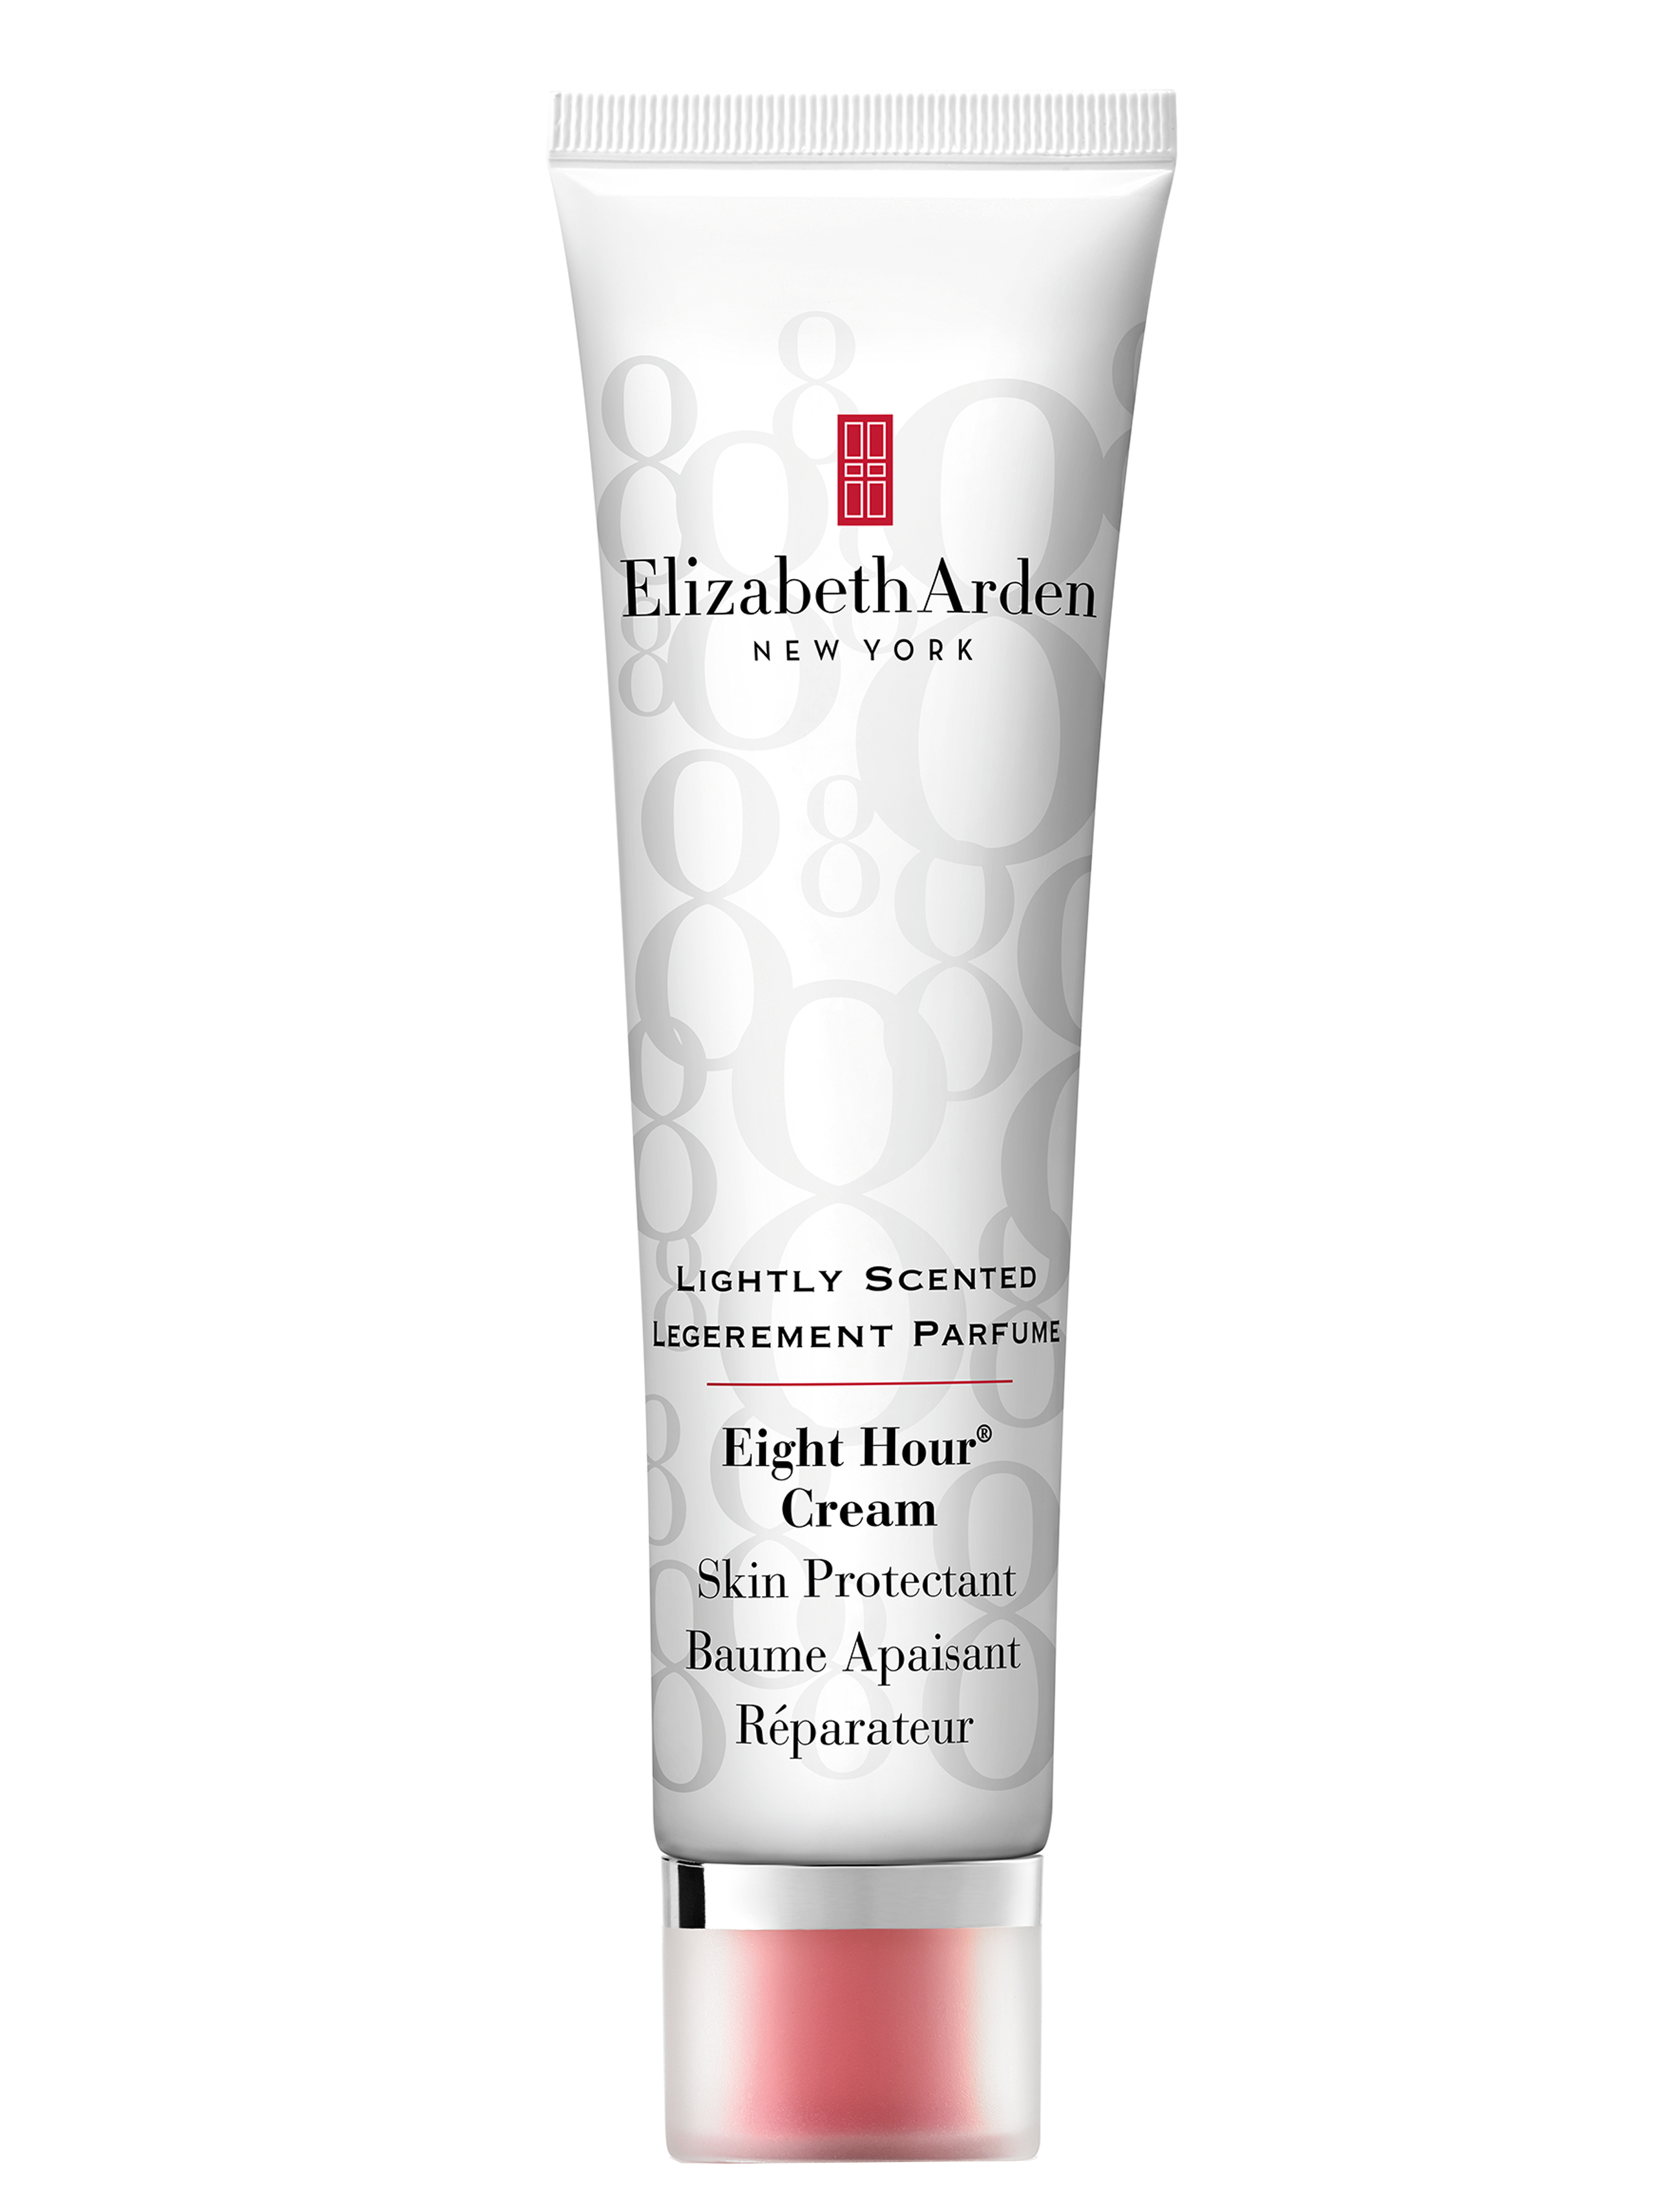  Eight Hour Cream Skin Protectant Lightly Scented